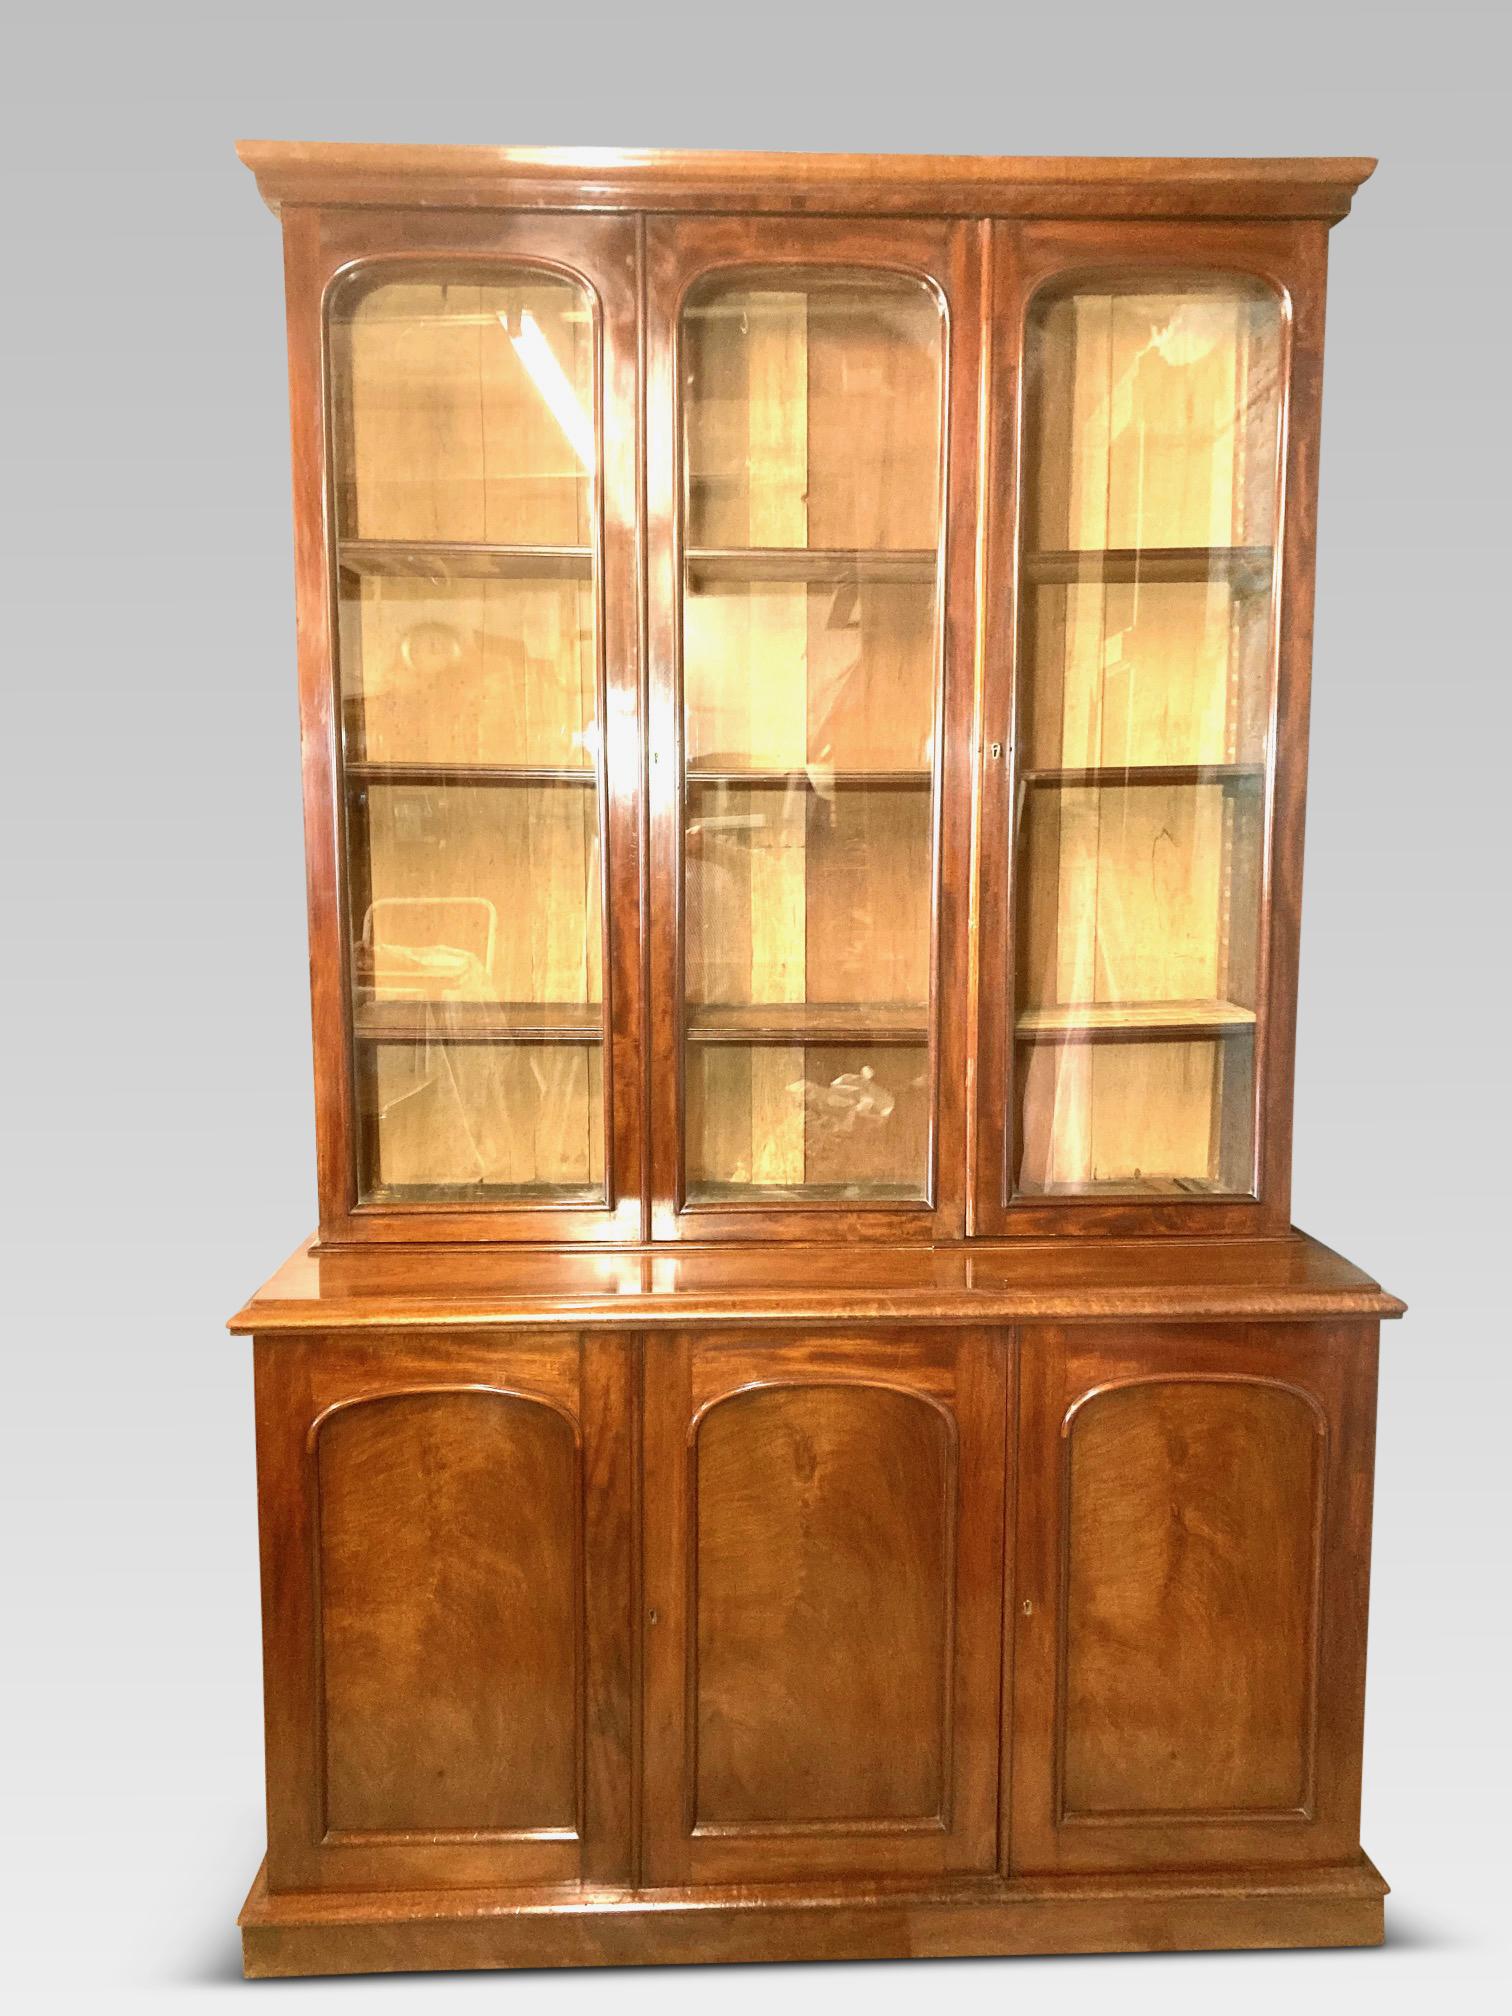 A most attractive English library bookcase in mellow mahogany.
Dating from the mid-19th century, this delightful bookcase is exceptionally
well made and retains its original finish and mellow antique patination.
With working keys, the 3 top glazed